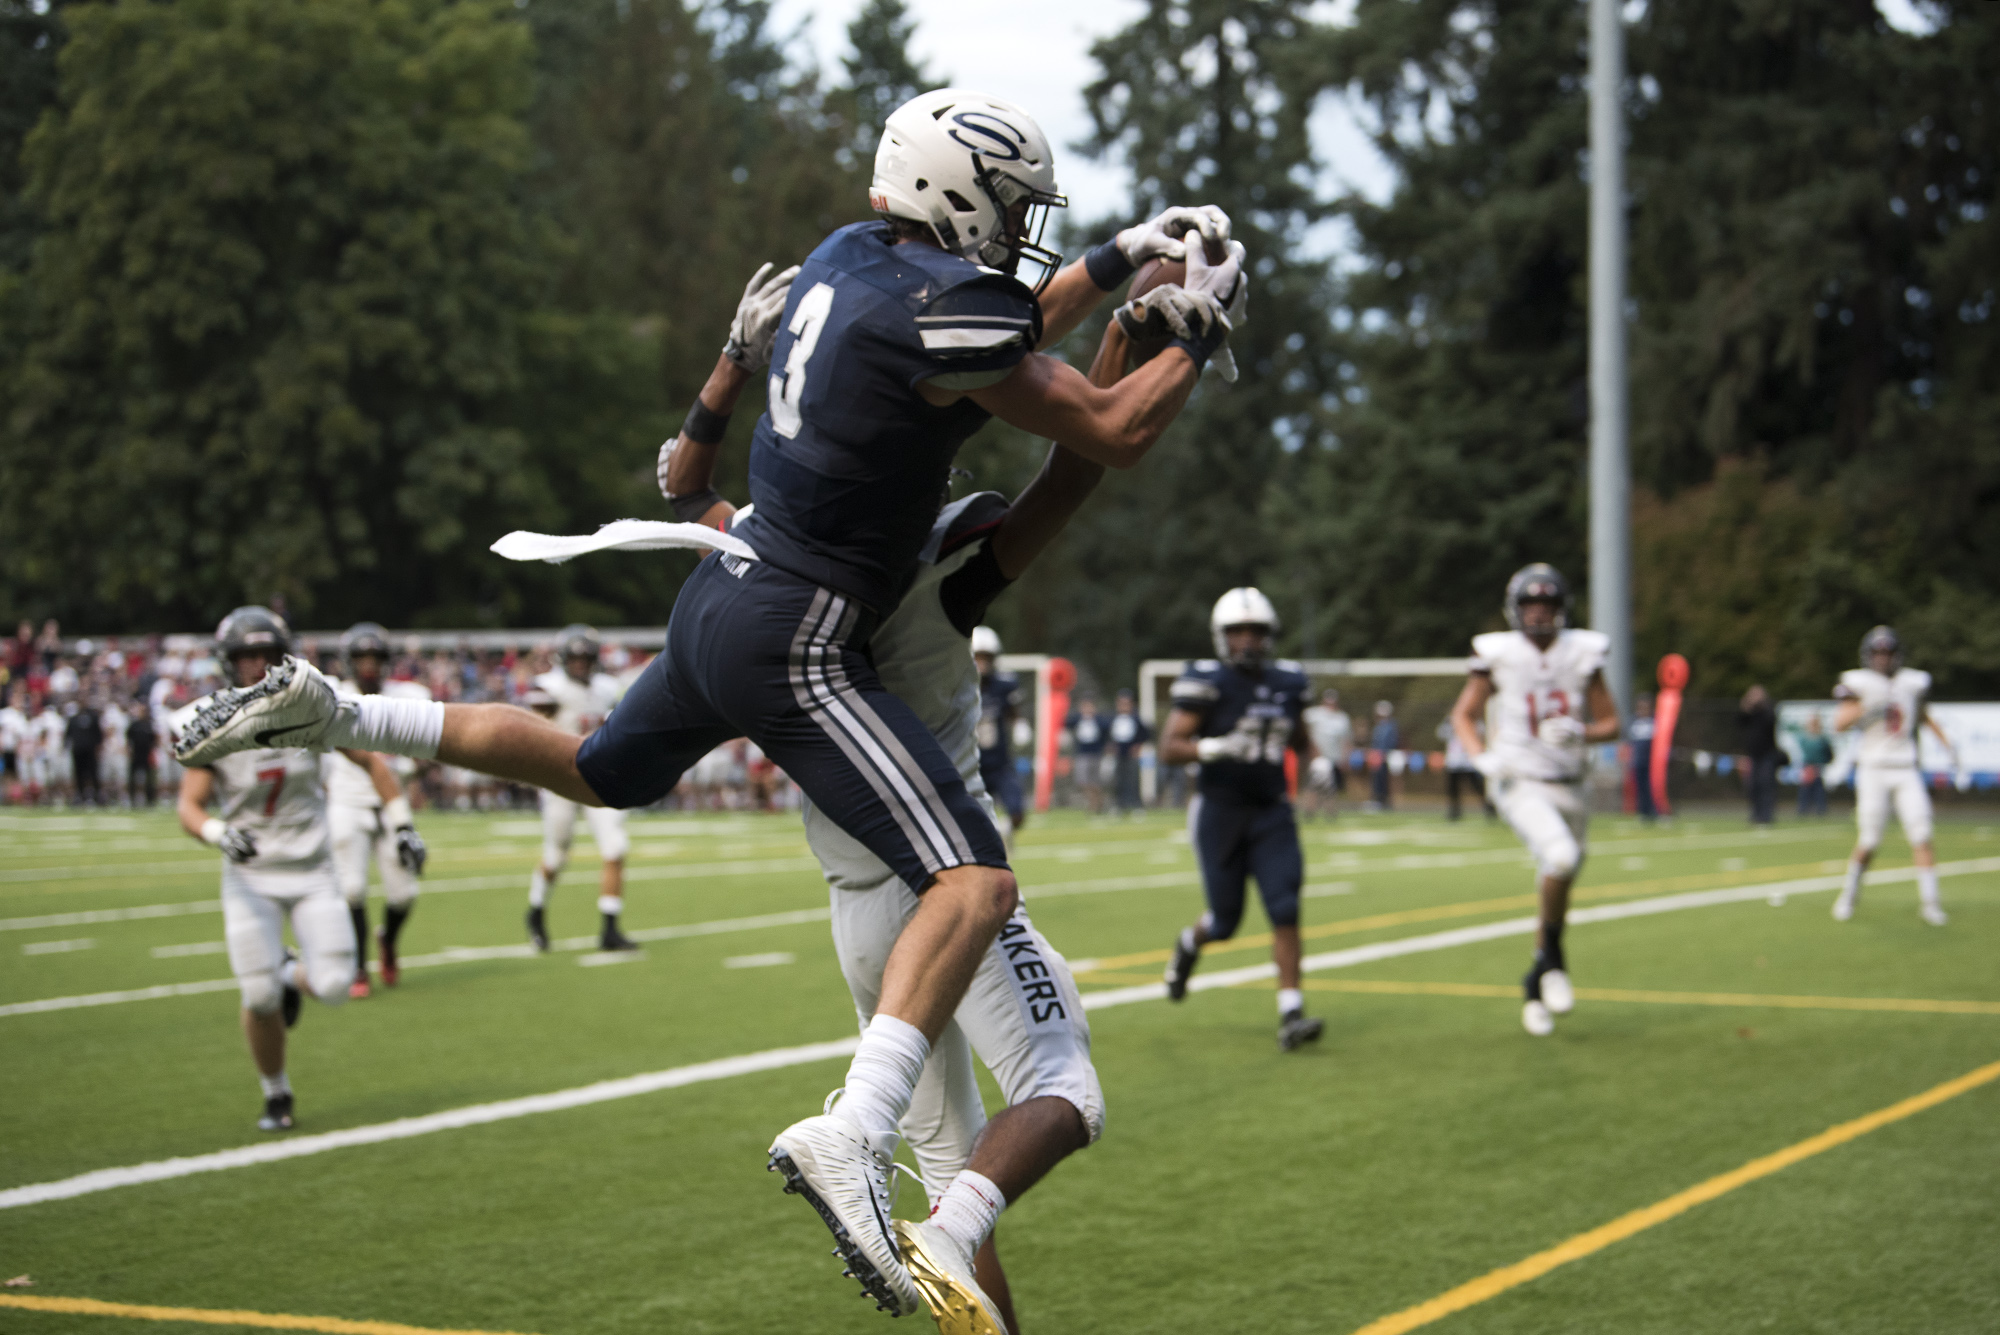 Skyview's Cole Grossman (3) catches the ball for a touchdown as Camas' Isaiah Abdul (2) tries to block him during Friday night's game at Kiggins Bowl in Vancouver on Oct. 6, 2017. Camas defeated Skyview 38-20.